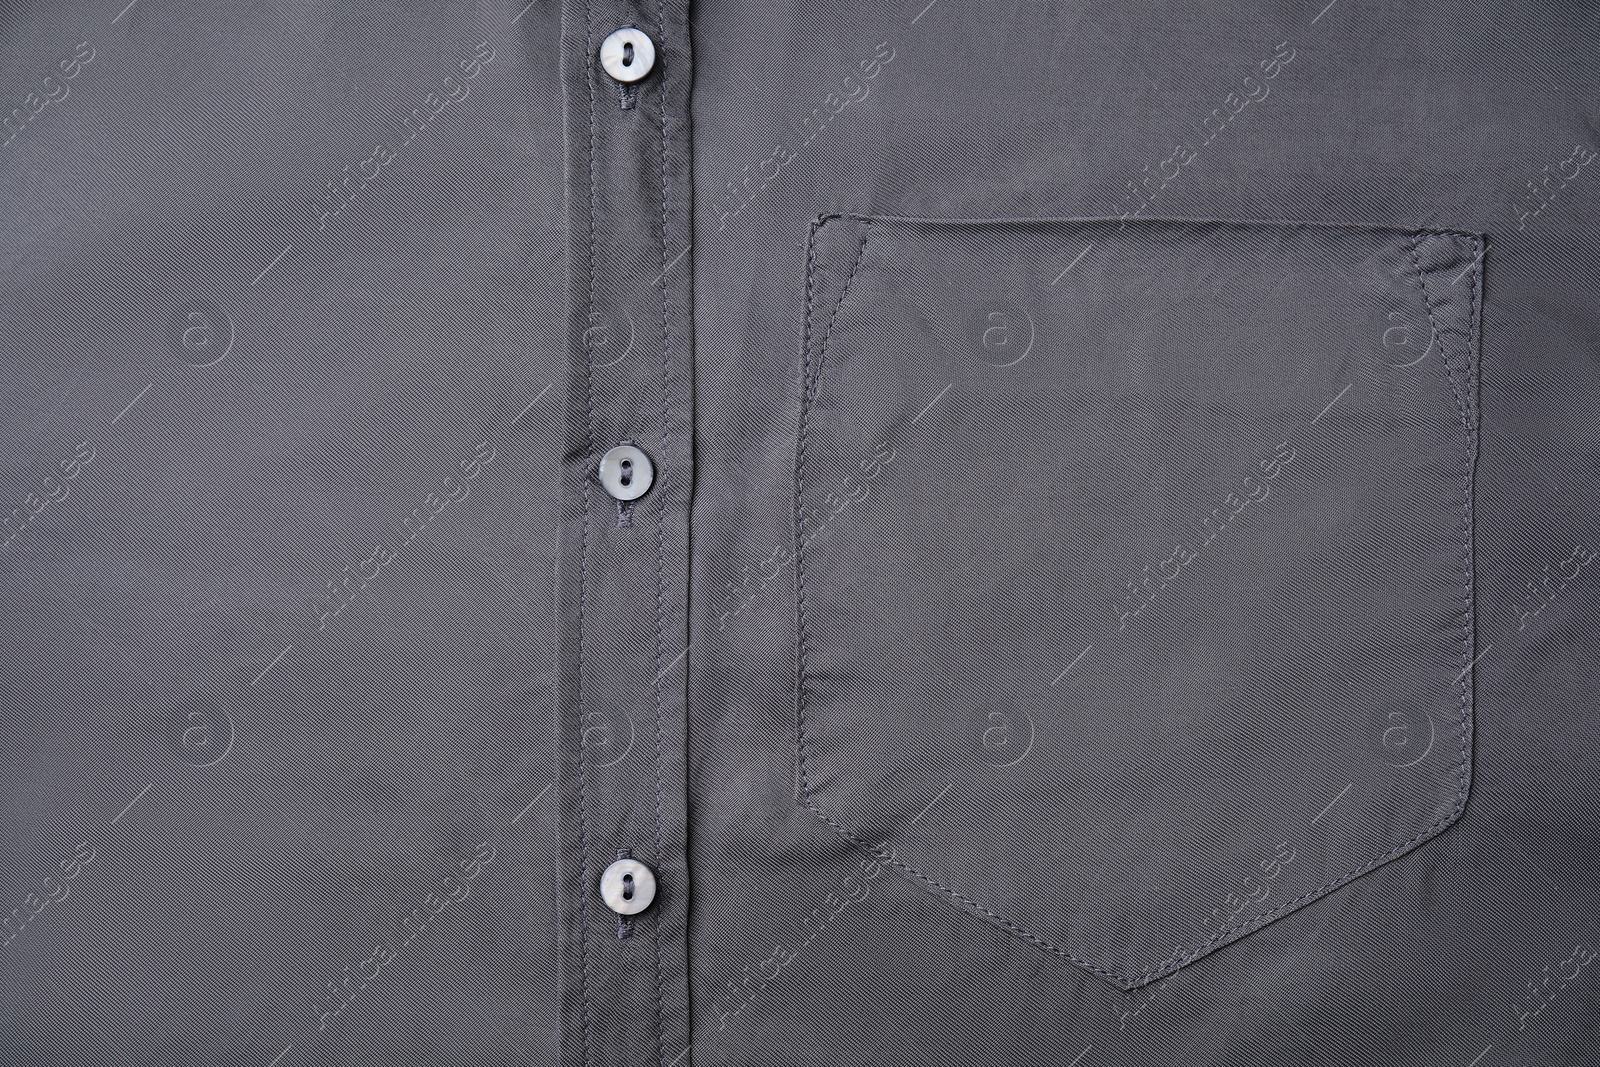 Photo of Gray shirt with pocket as background, top view